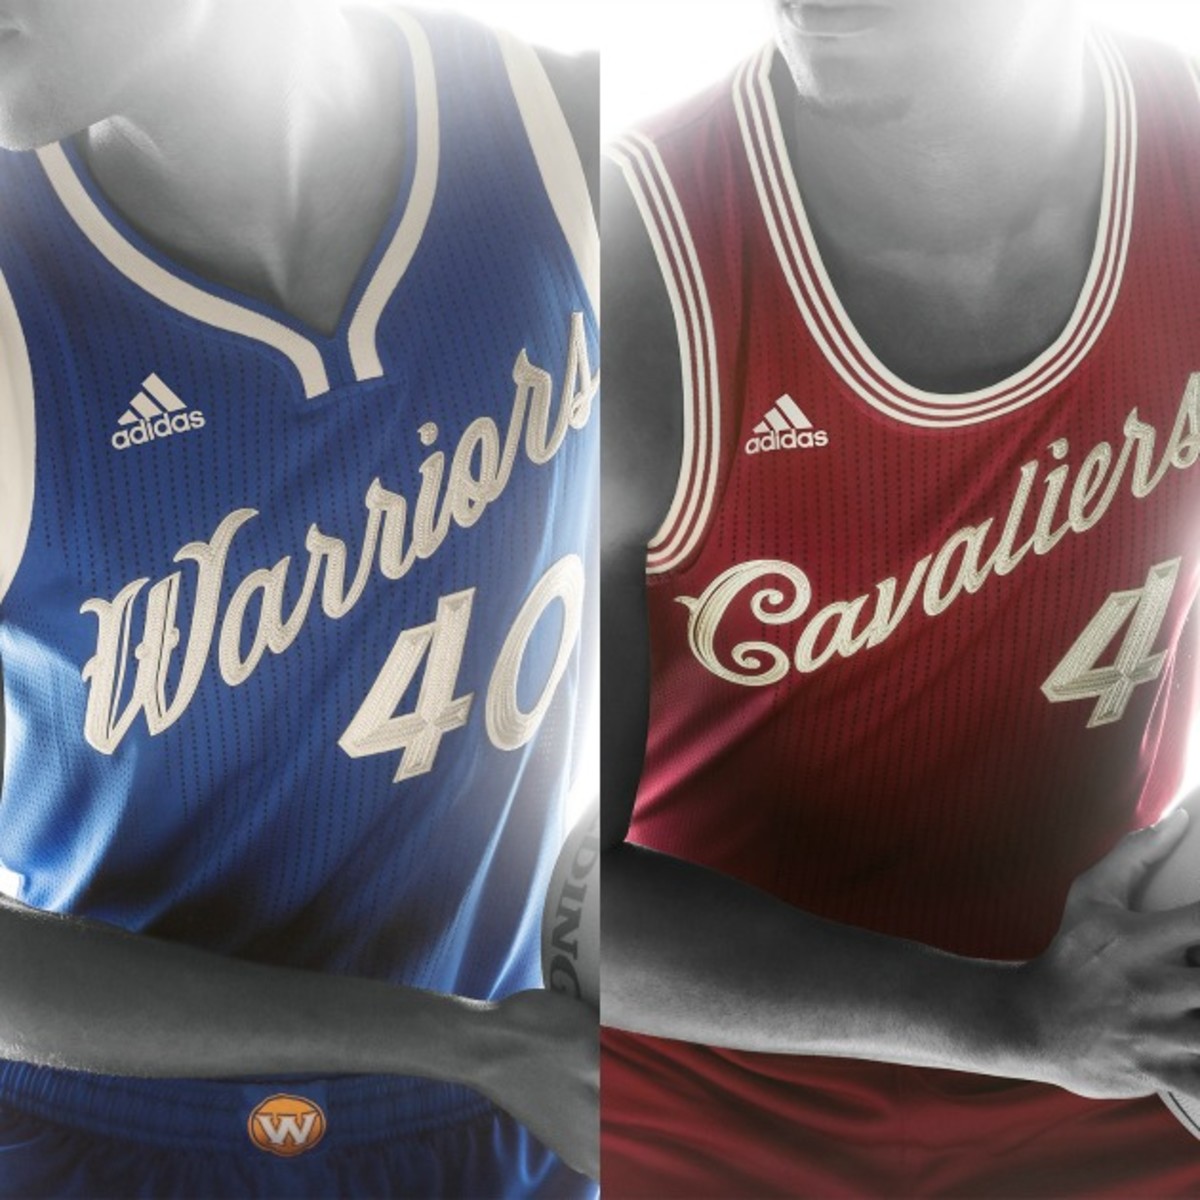 Here Are The Christmas Day Uniforms The NBA Doesn't Want You To